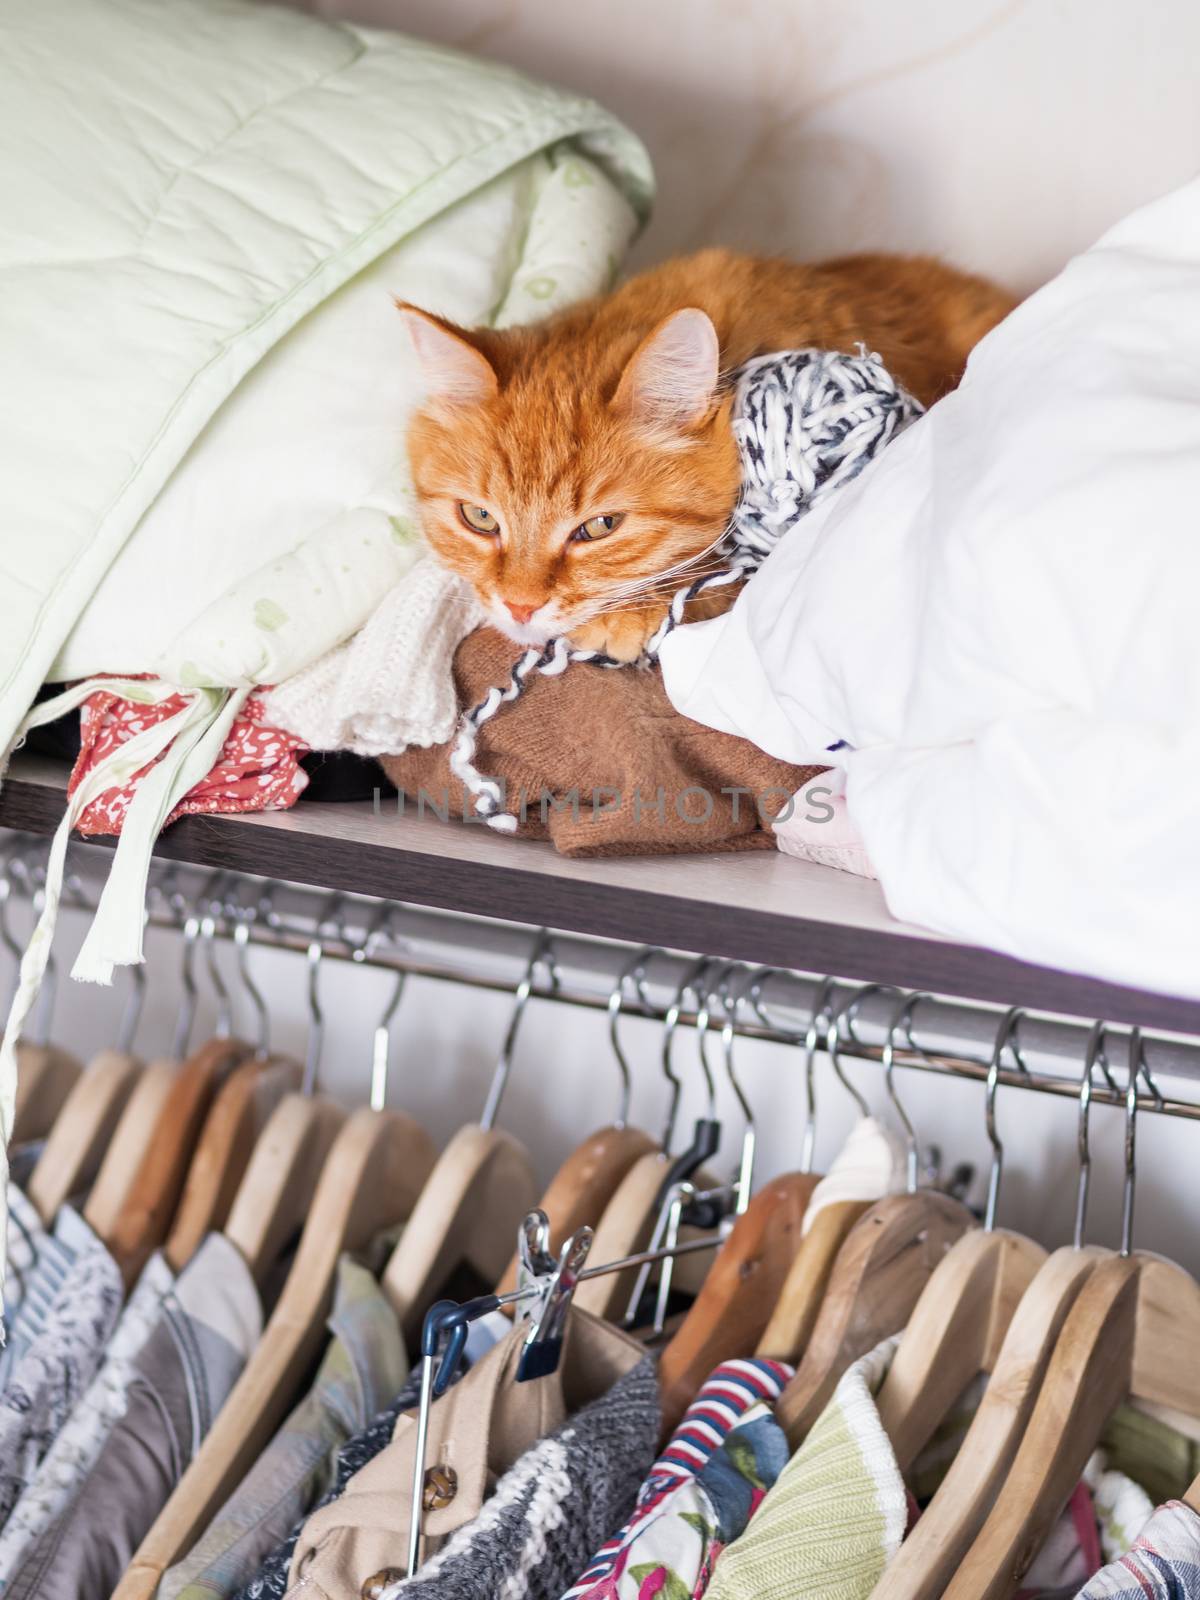 Cute ginger cat sleeps on a pile of knitted clothes. Fluffy pet is dozing on shelf in wardrobe.